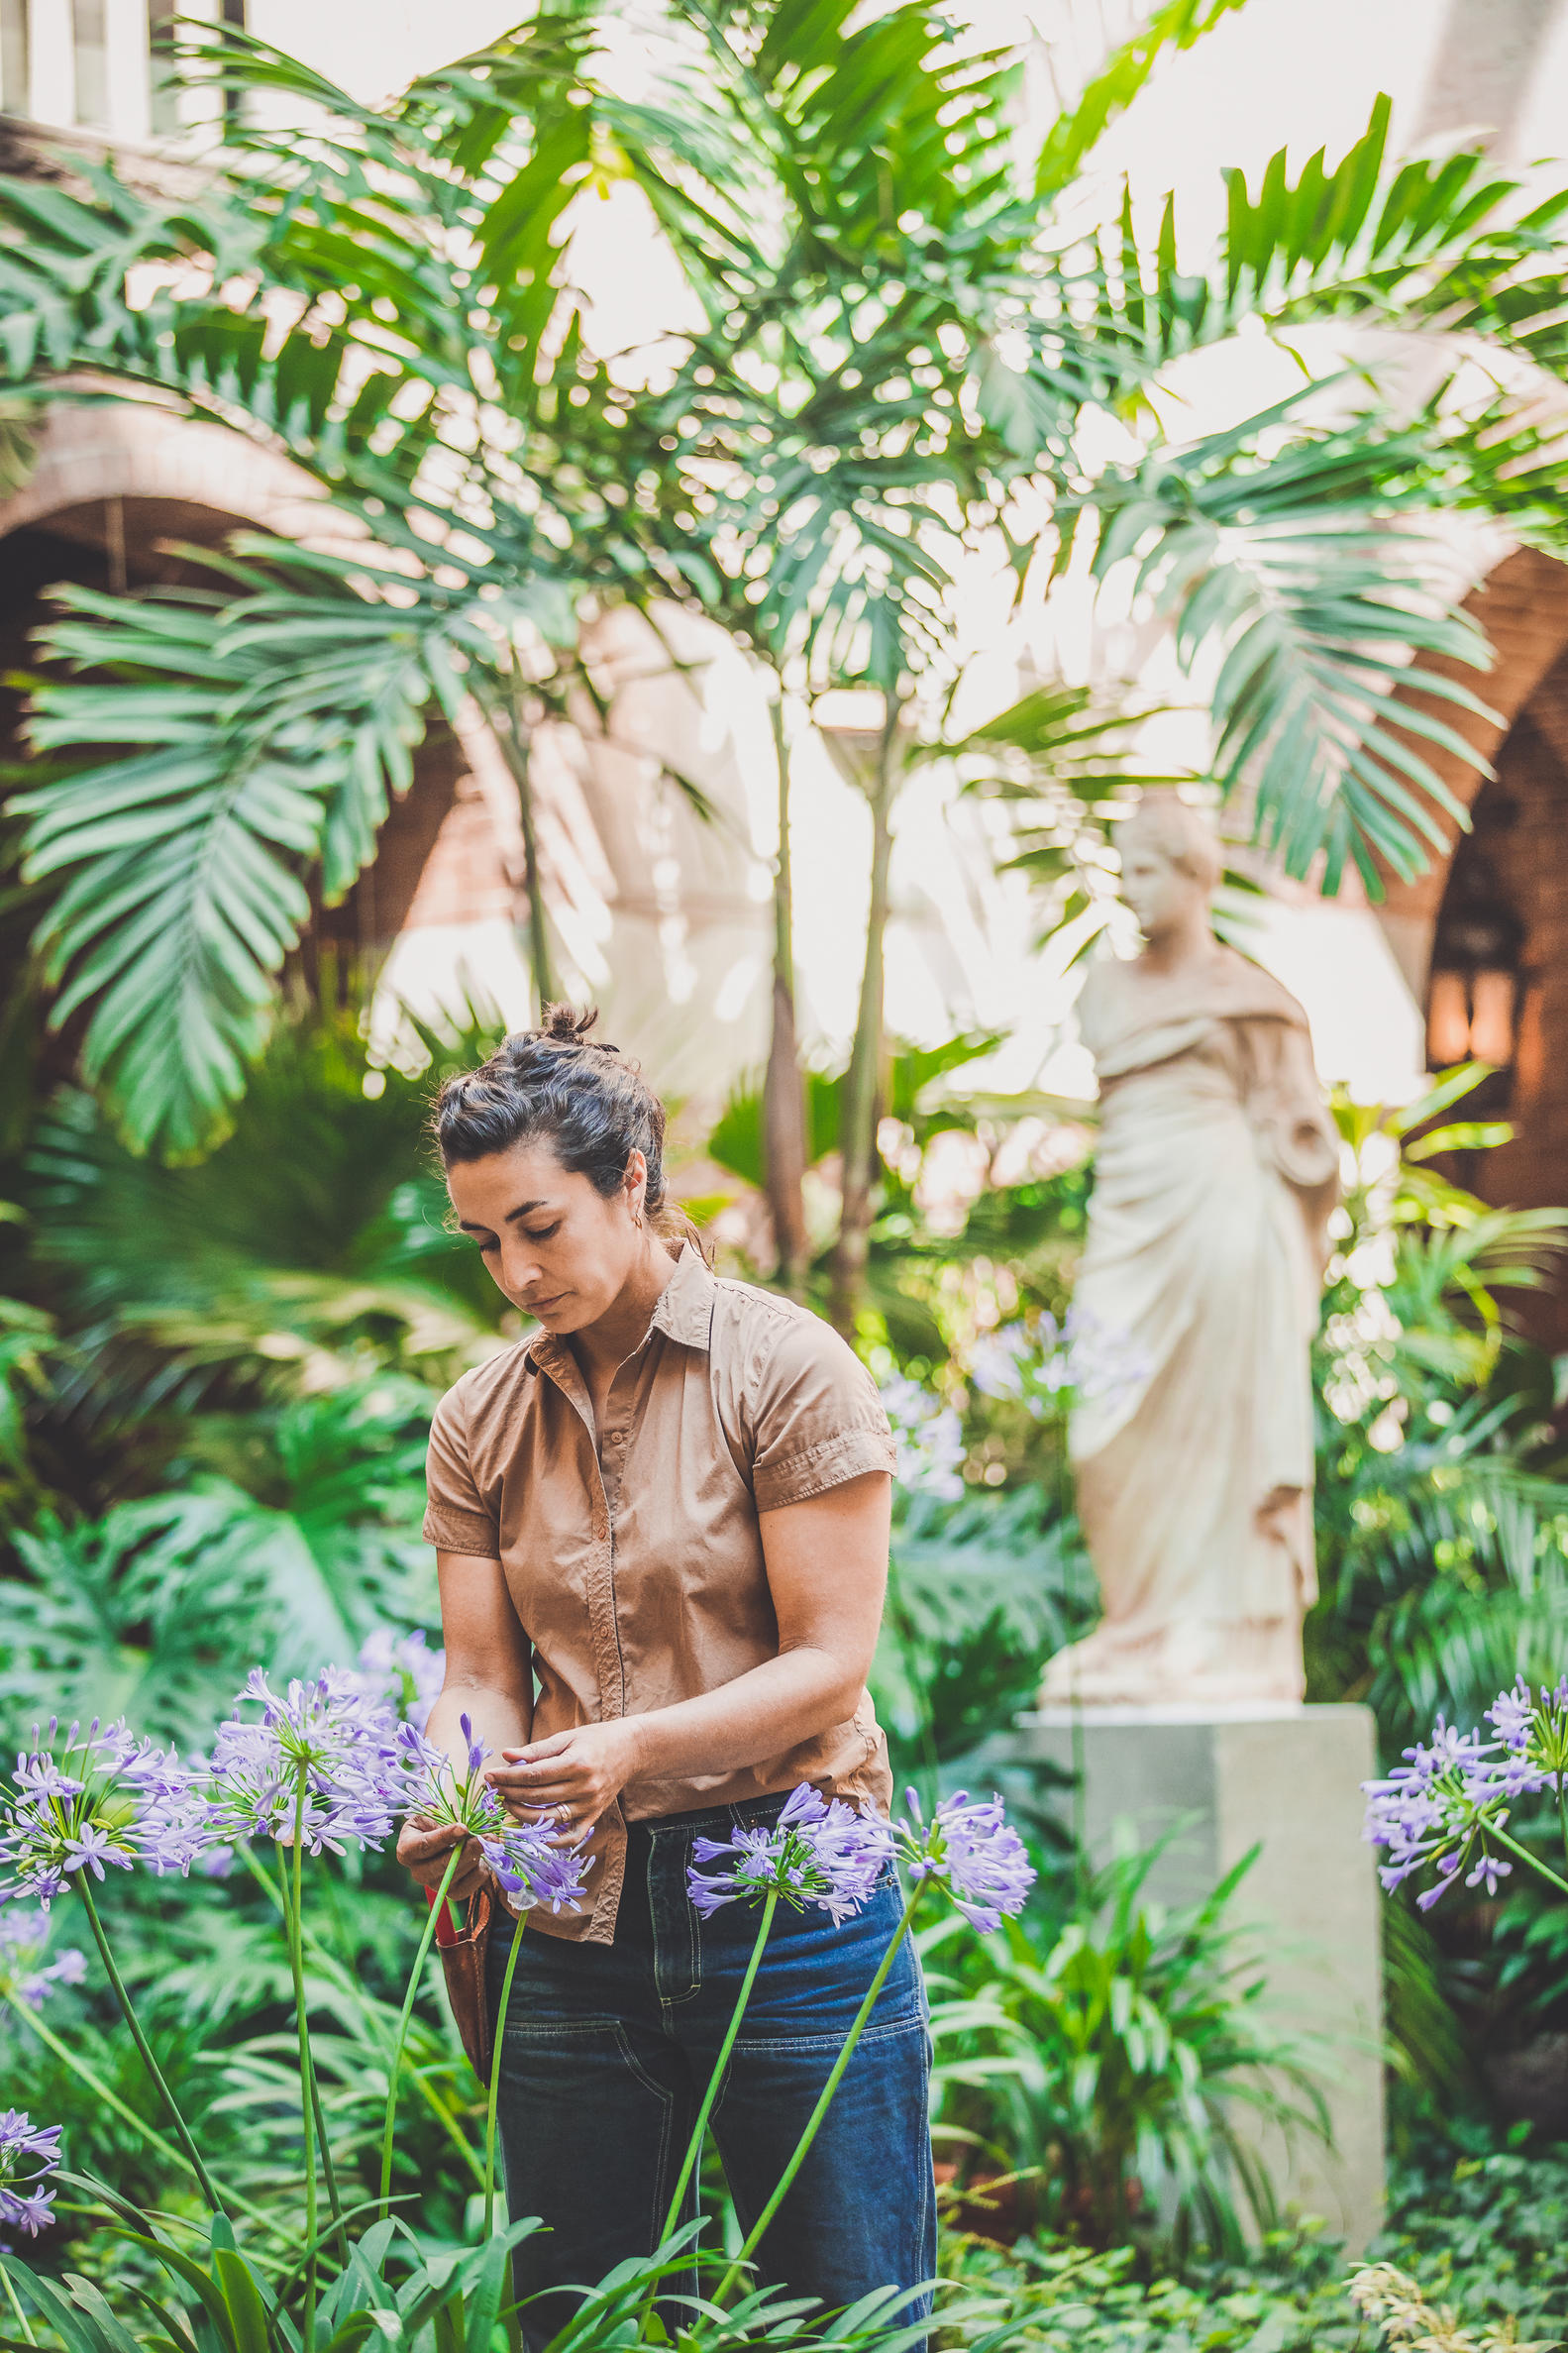 Photo of person working with plants.